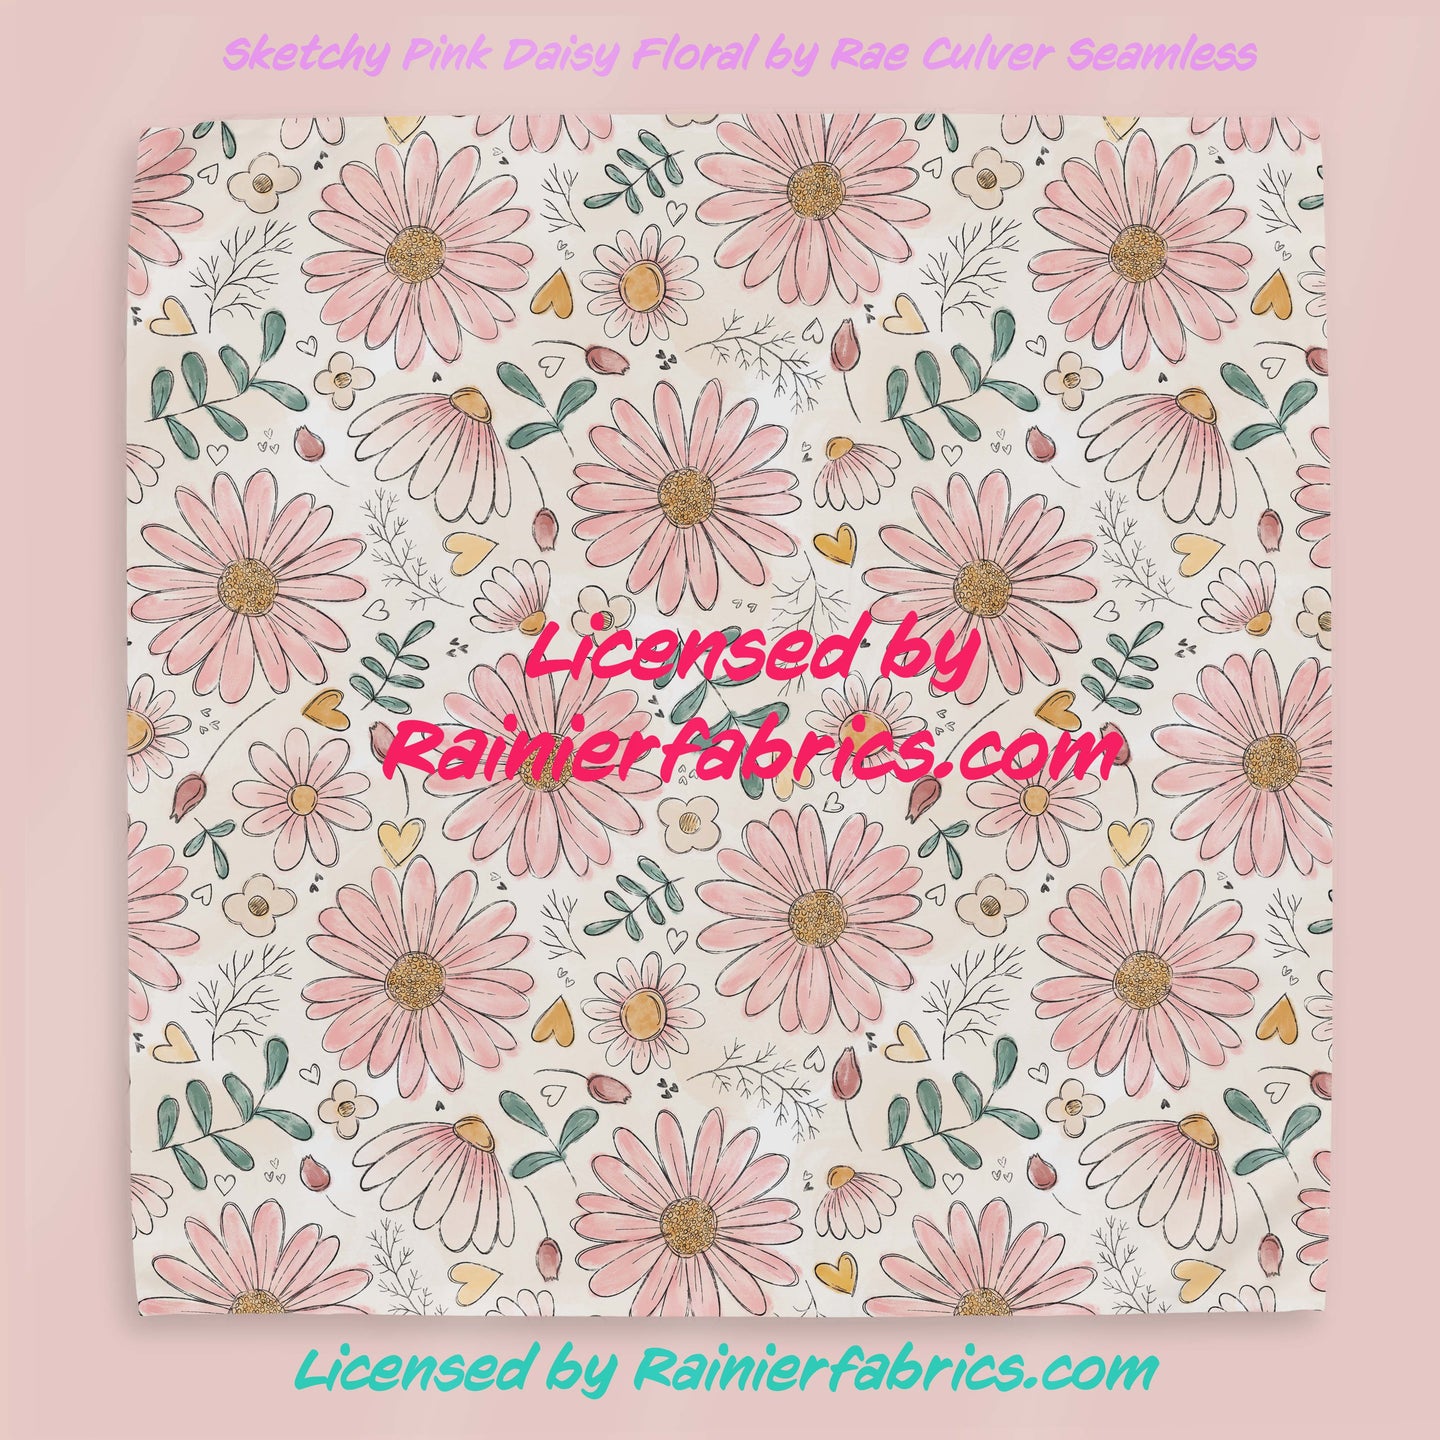 Sketchy Pink Daisy Floral and Stripes by Rae Culver Seamless - 2-5 business days to ship - Order by 1/2 yard